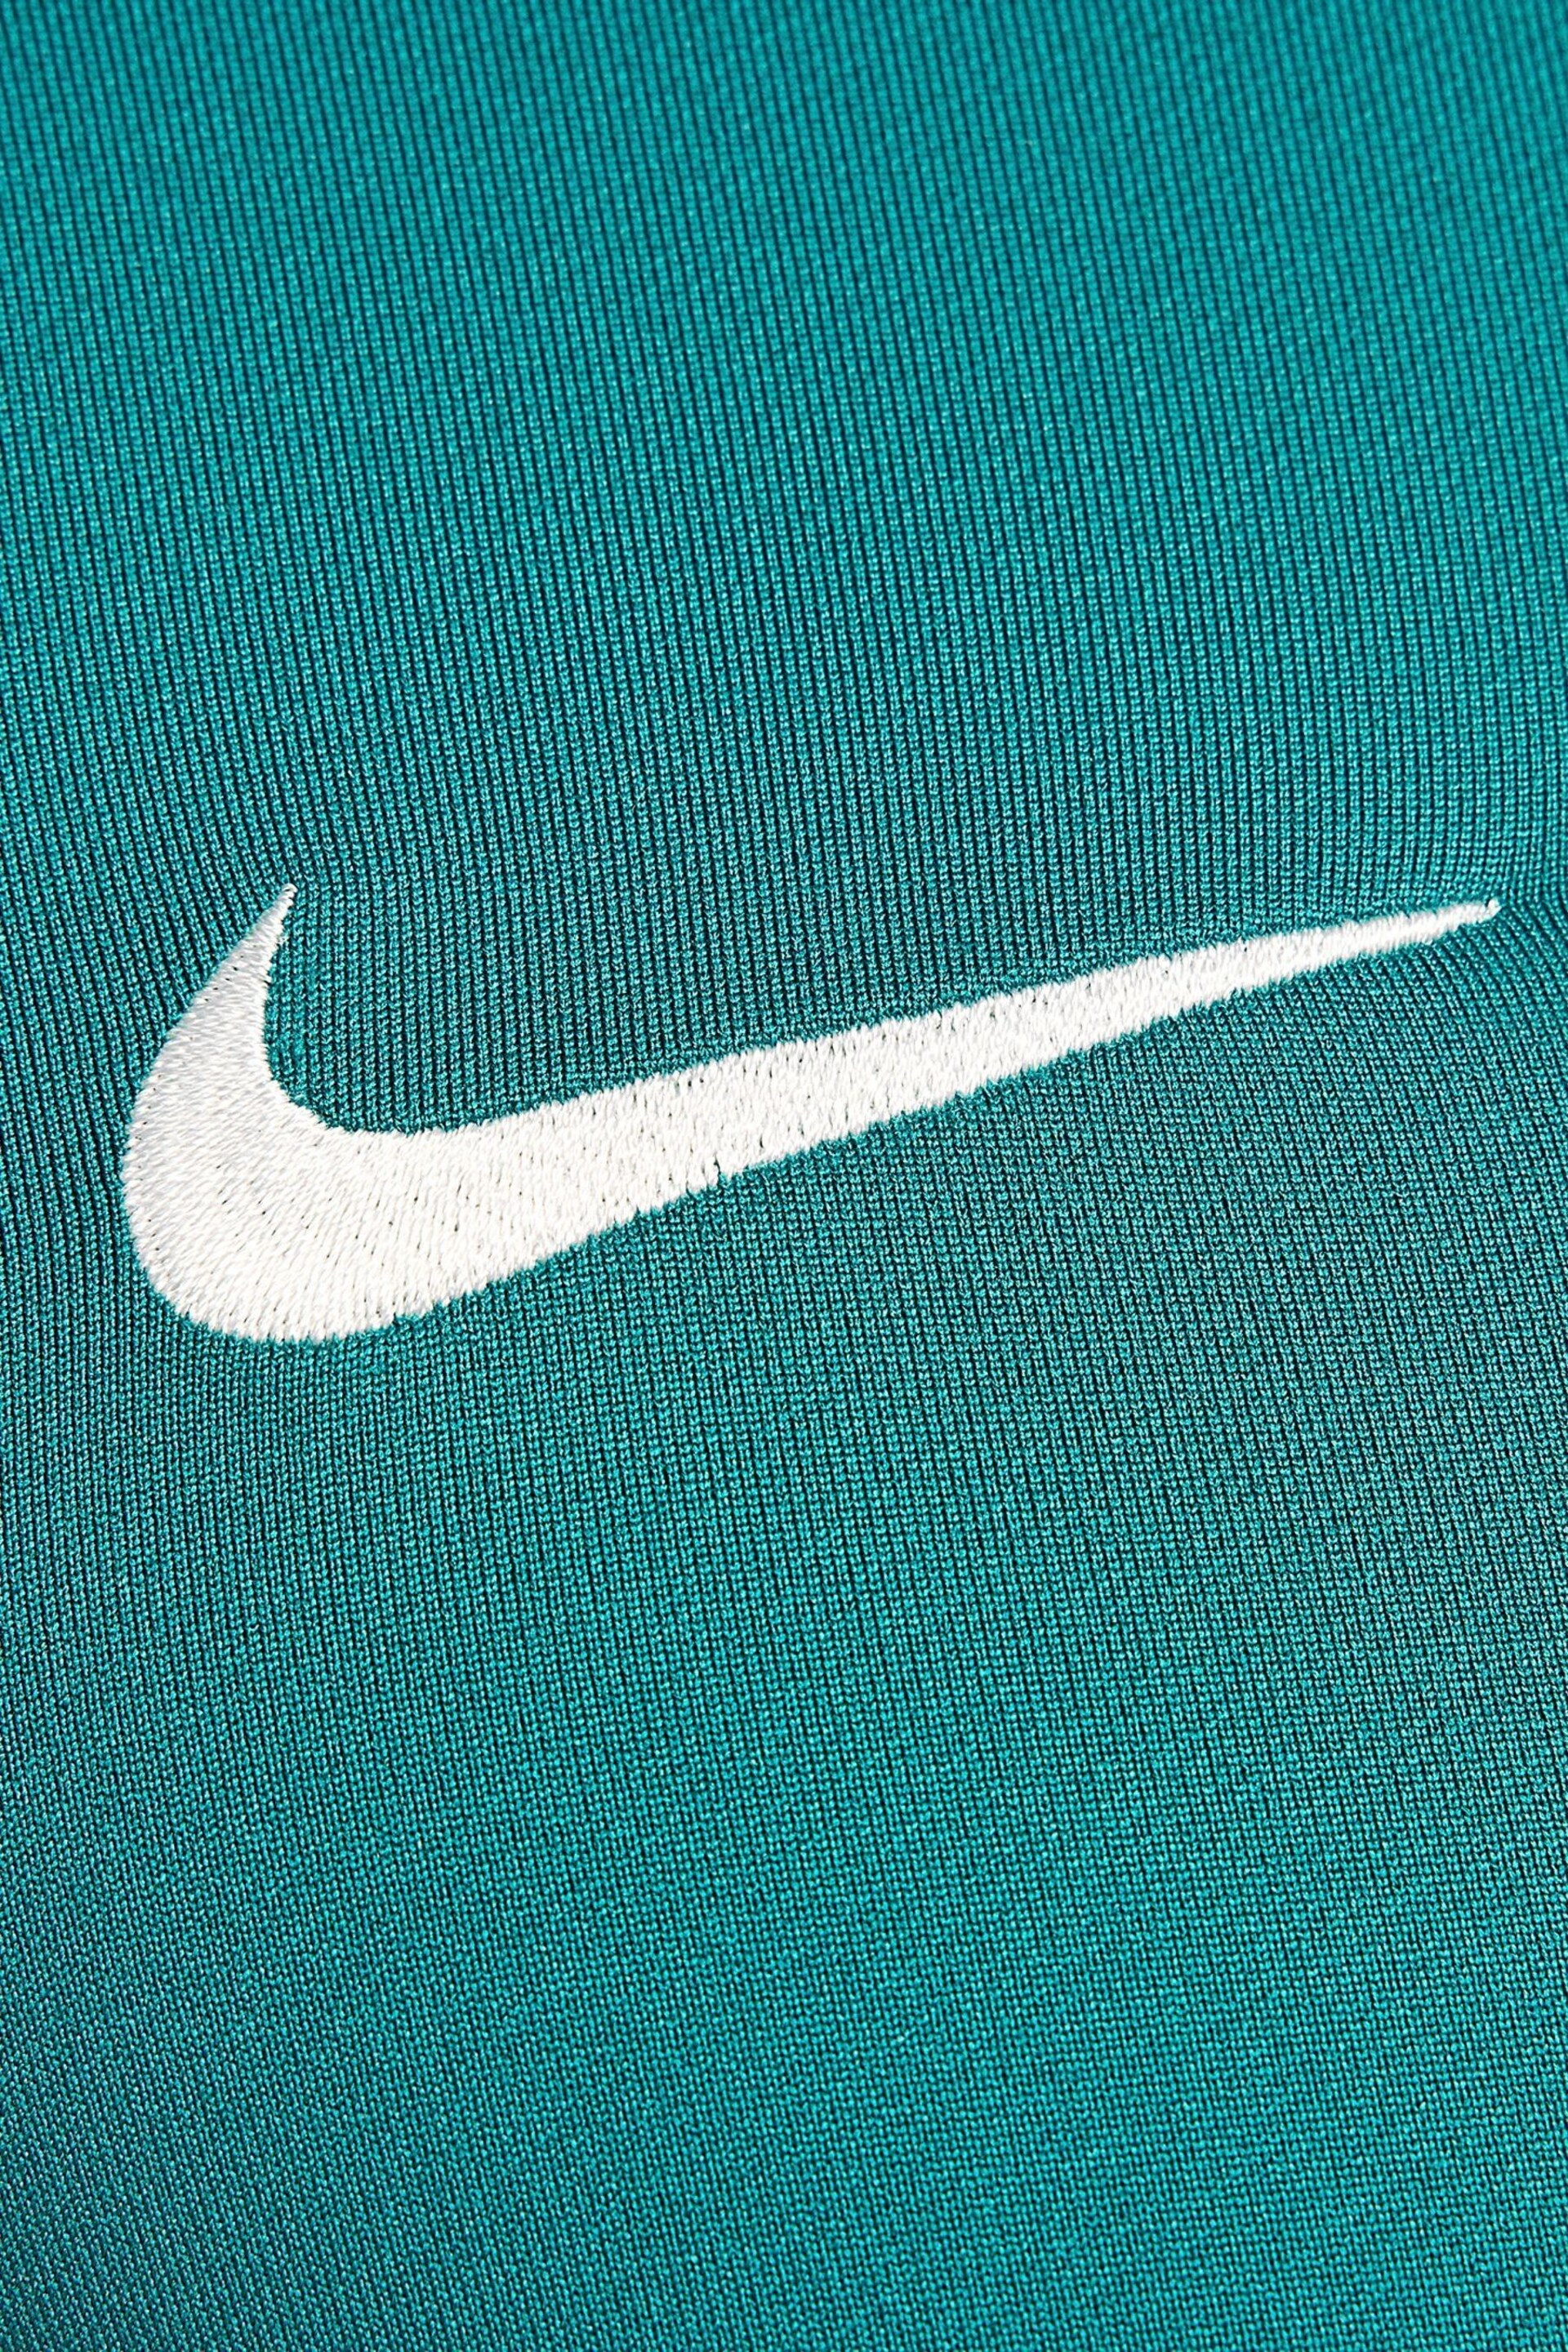 Nike Green Portugal Strike Training Drill Top - Image 3 of 3